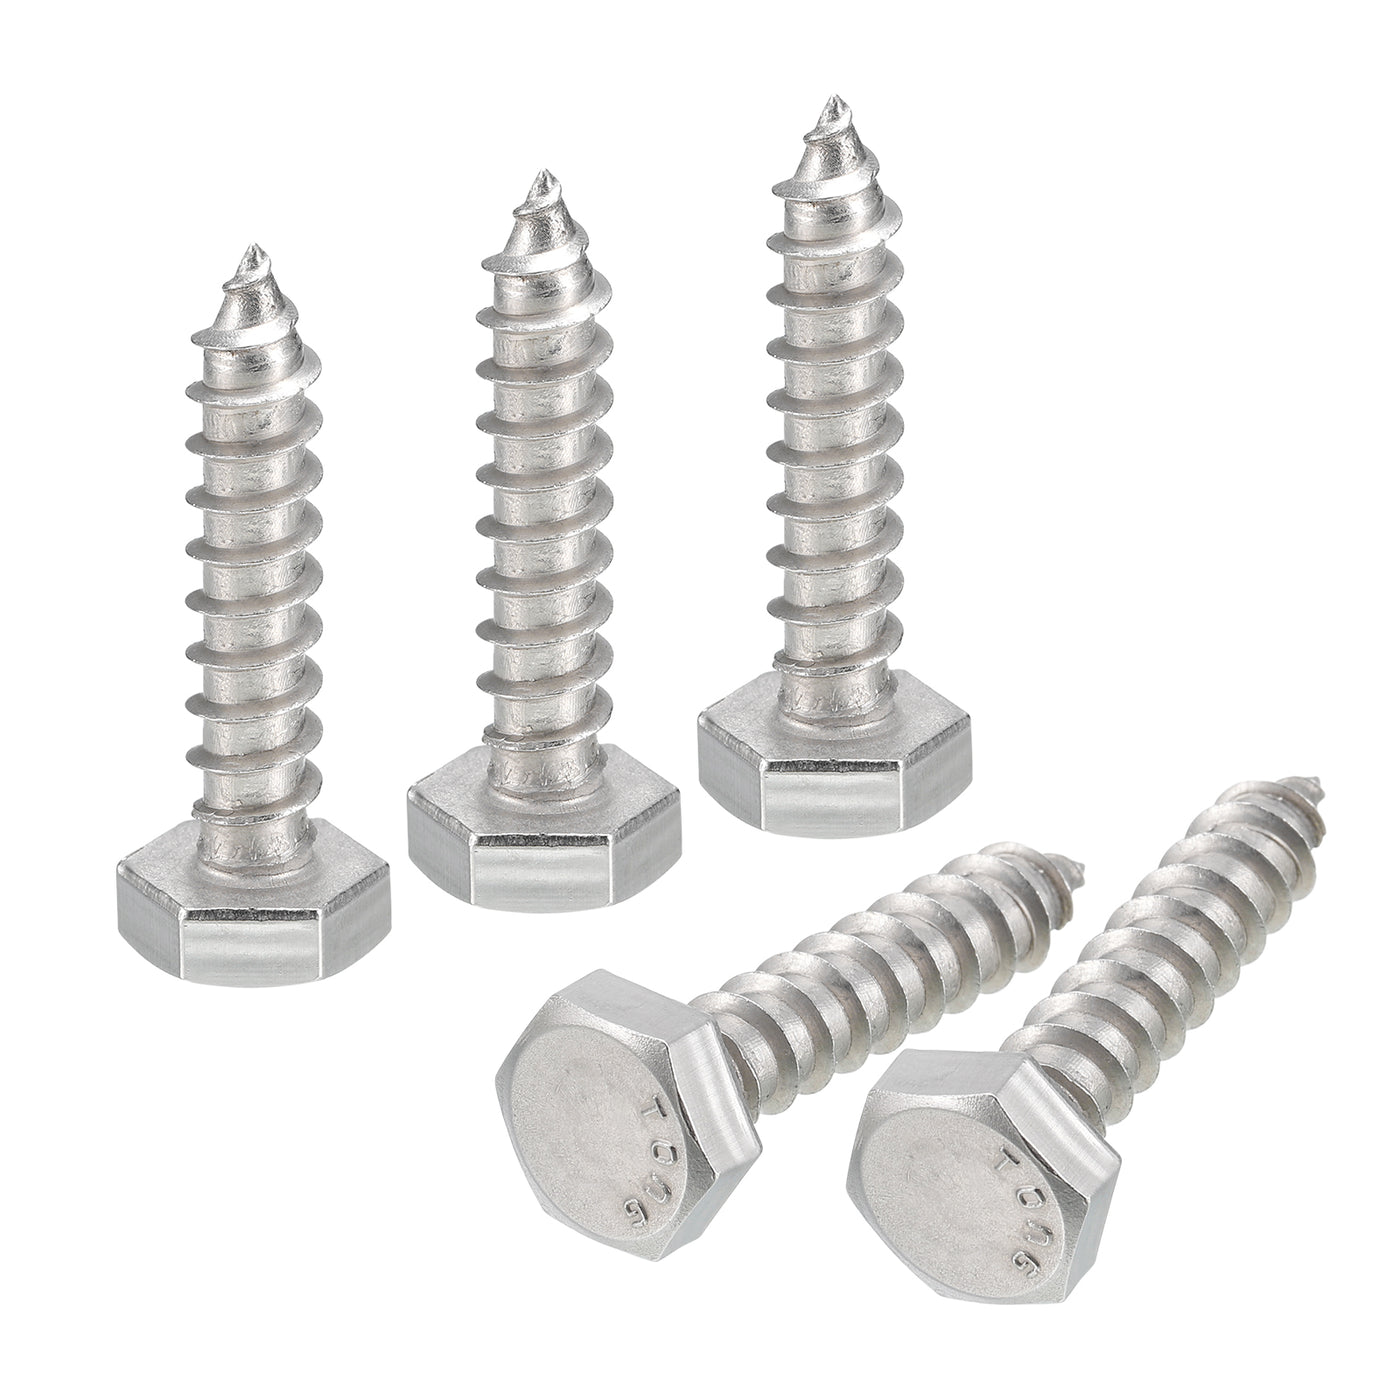 uxcell Uxcell Hex Head Lag Screws Bolts, 25pcs 1/4" x 1-1/4" 304 Stainless Steel Wood Screws